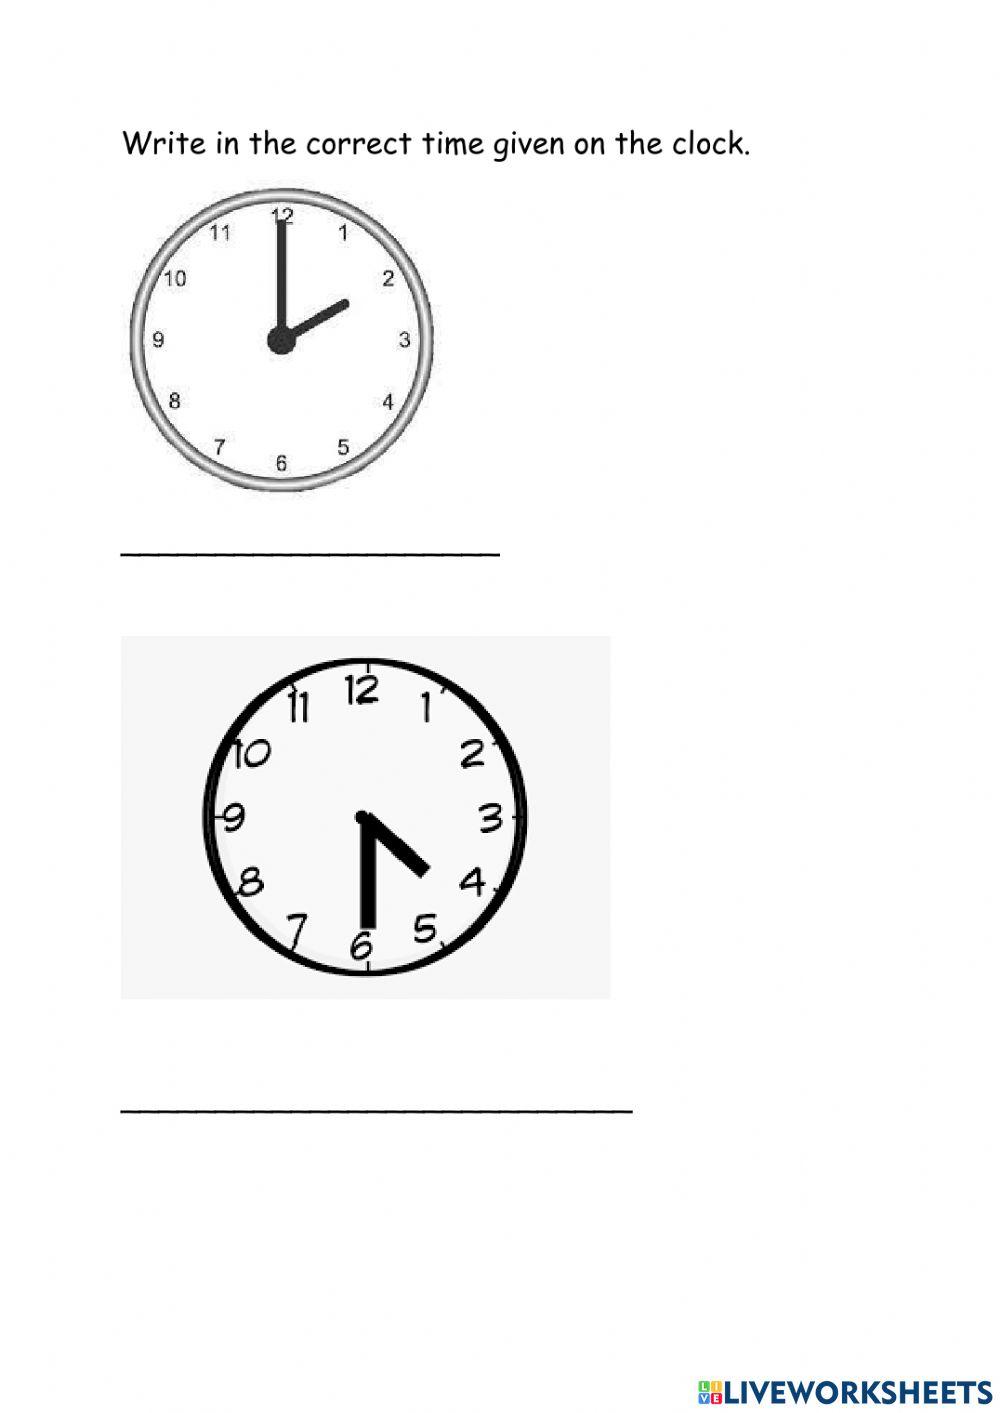 Difference between Hour and Half Past